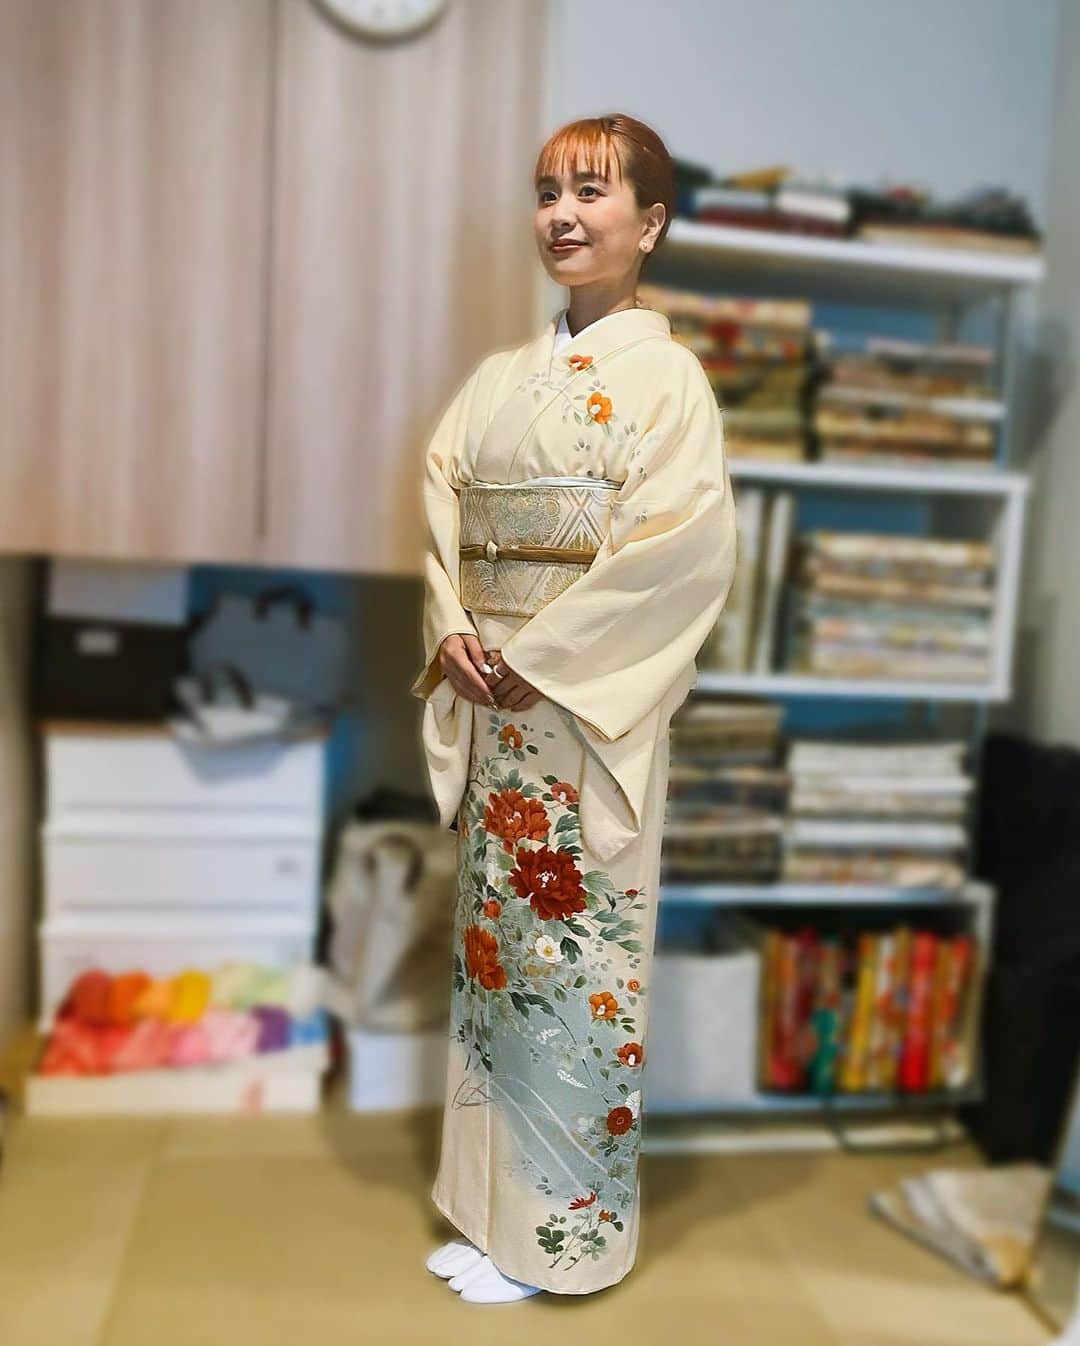 ももさんのインスタグラム写真 - (ももInstagram)「I’m home! Got back to JAPAN🇯🇵  日本に帰ってきました！！ただいま！  「中村勘九郎 中村七之助 錦秋特別公演2023」 ラジオおわりで静岡へ観に行ってきました🚄  せっかく観に行くんだからと、たまご色🥚のお着物に鶴柄の帯を締めてもらって、全力鶴さまレッツゴー！なコーディネートで、 生まれて初めて歌舞伎観劇！(日本舞踊か👘)  皆様と、そして鶴さま、 本当にお美しかった、、、🥹 感動！  あといいお着物を着付けてもらって喜び💕💕🤝 これを機にお着物沢山着たいなと思いました。 着付けも当日予約入れて、当日飛び込みで美容院へ行ってヘアセットもやってもらって、当日券で観劇🏃‍♀️ 何もかもどうなるか分からなかったから事前に準備できなかったんだけどそれもプラスで何もかも最高だった🥰  さっきまでヨーロッパにいたのに帰ってきて早々、ジャパニーズぽい1日が過ごせて嬉しい🍙  日本に帰ってきてよかった〜🤣  I had a day like a totally “Japanese”❤️ I was in Europe until last night but lol  I went to Shizuoka after my radio show to see “kabuki”! This was my first time to see Kabuki😳 And traditional Japanese dance as well. It was amazing and inspiring so much!! I love that characteristic music and their expressions and movements were really beautiful. When you come to Japan, you should absolutely try to go see them!!」10月16日 13時12分 - charanpo_momo